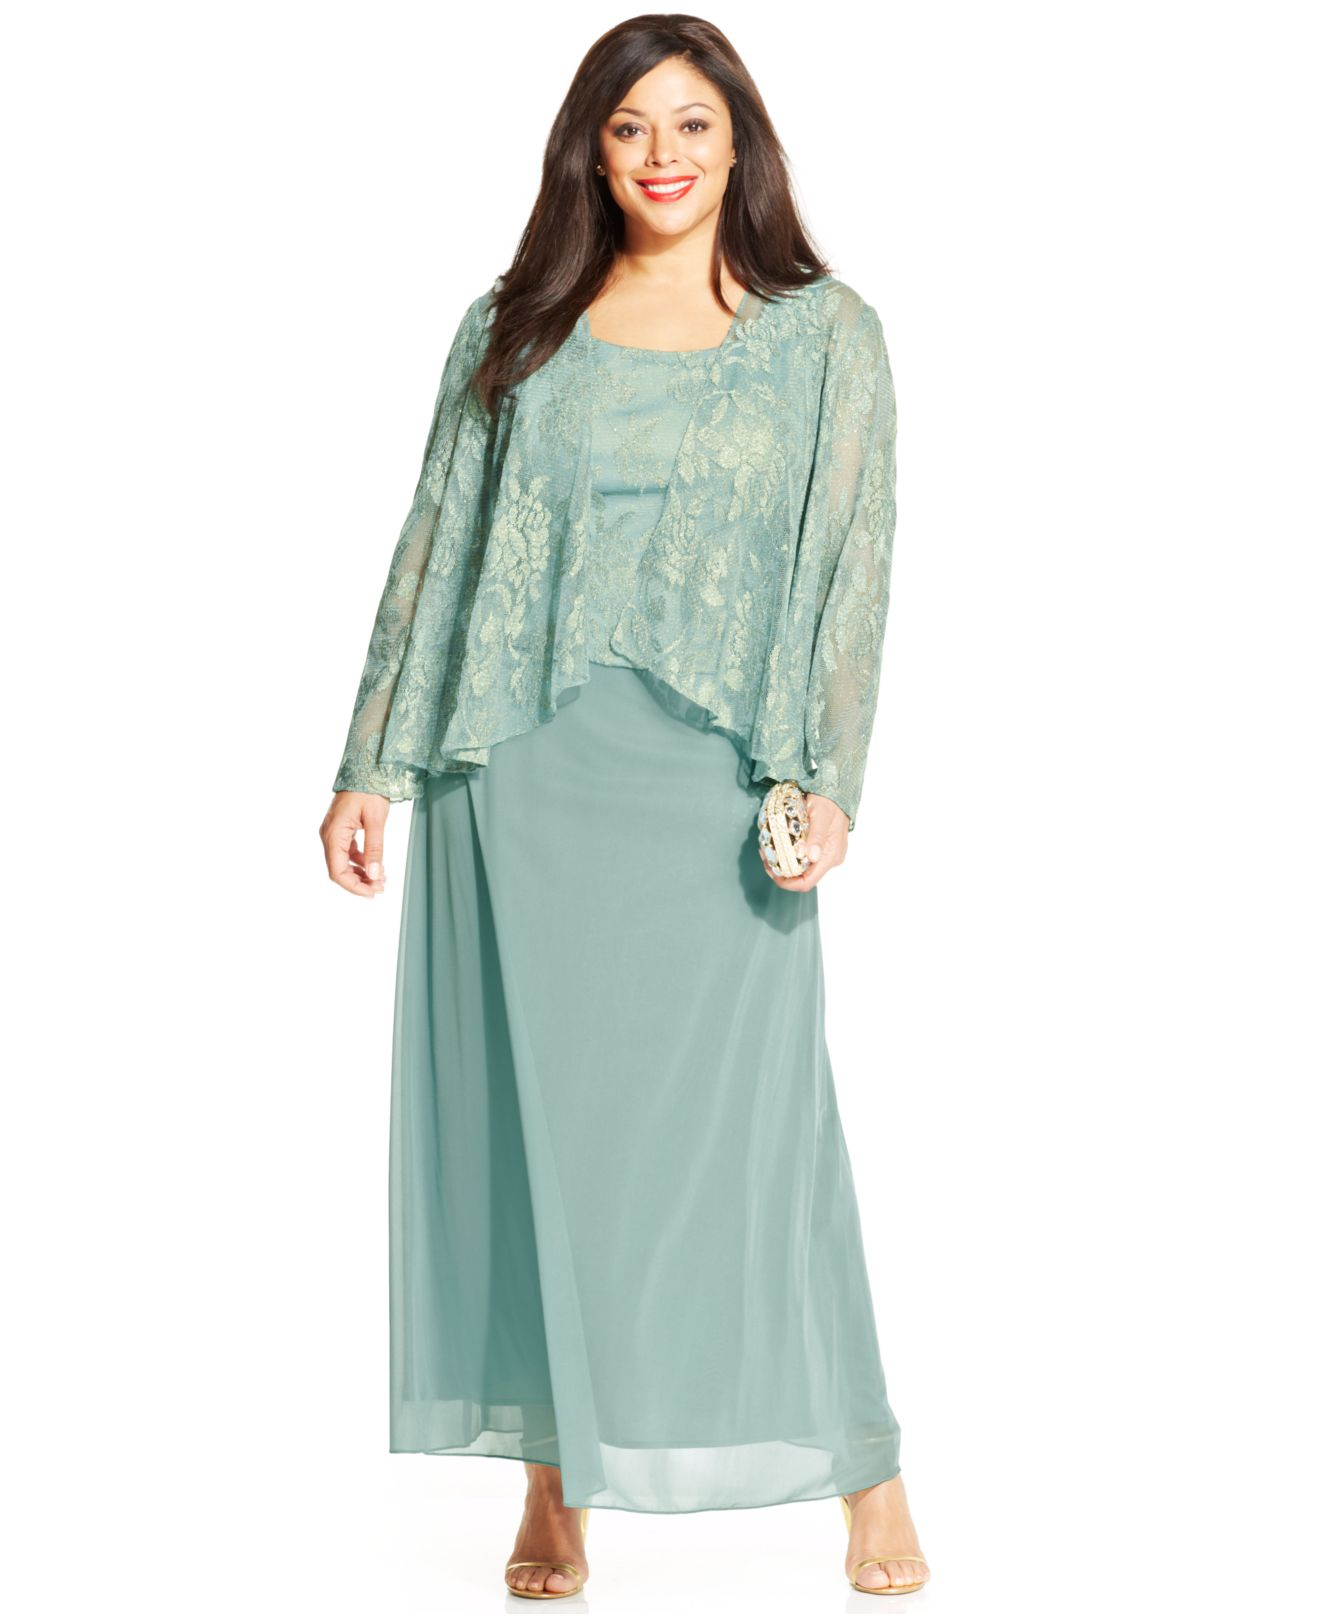 Lyst - Patra Plus Metallic Lace Dress And Jacket in Blue